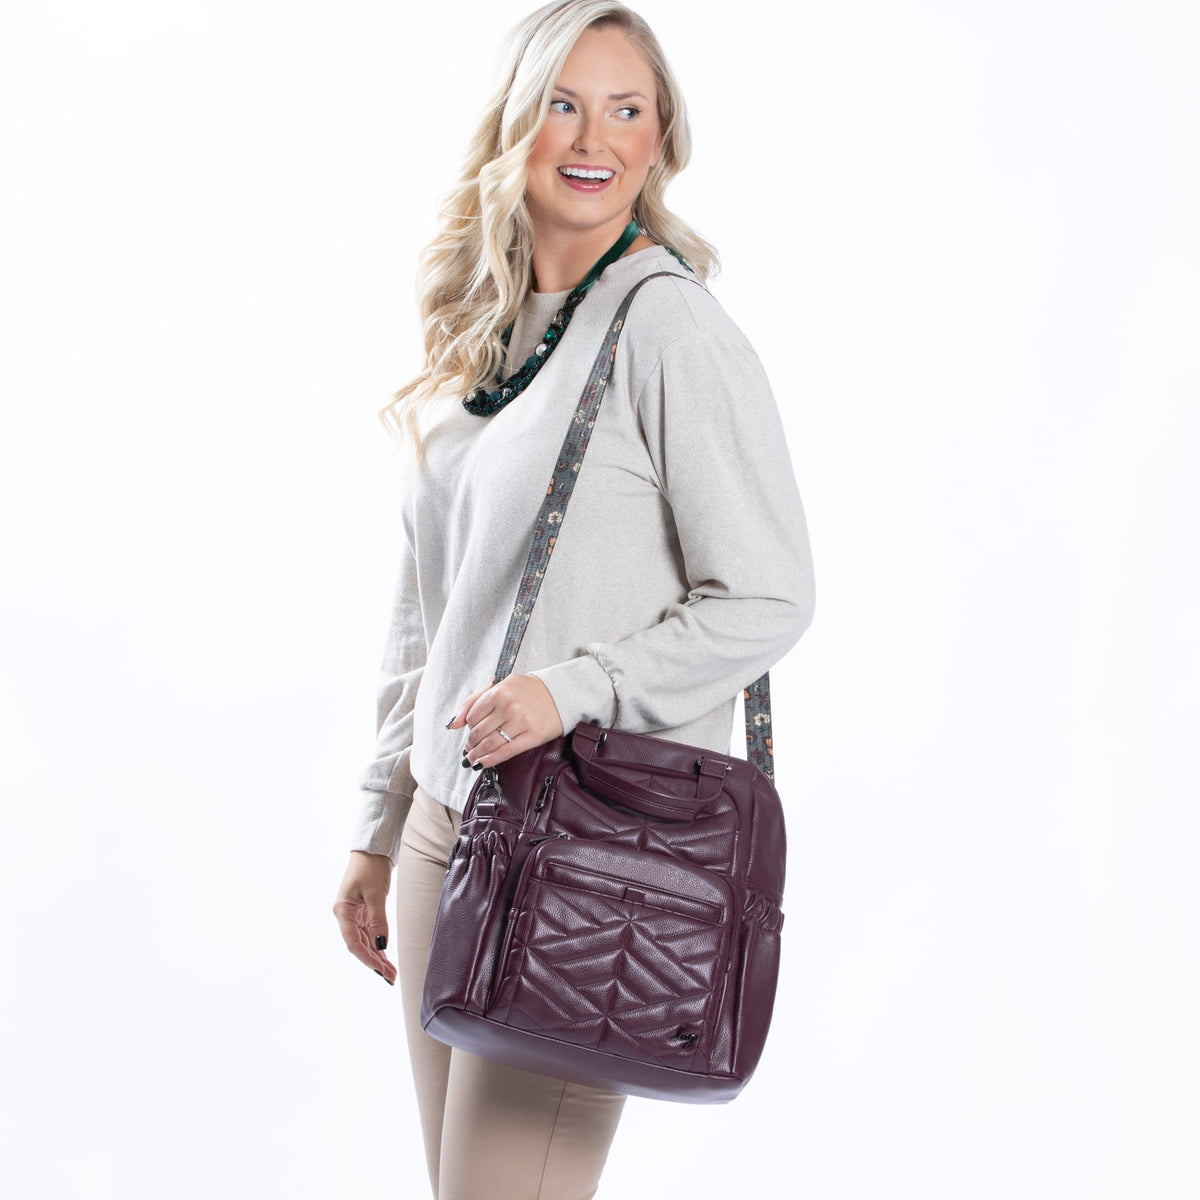 Canter Classic VL Convertible Tote Bag